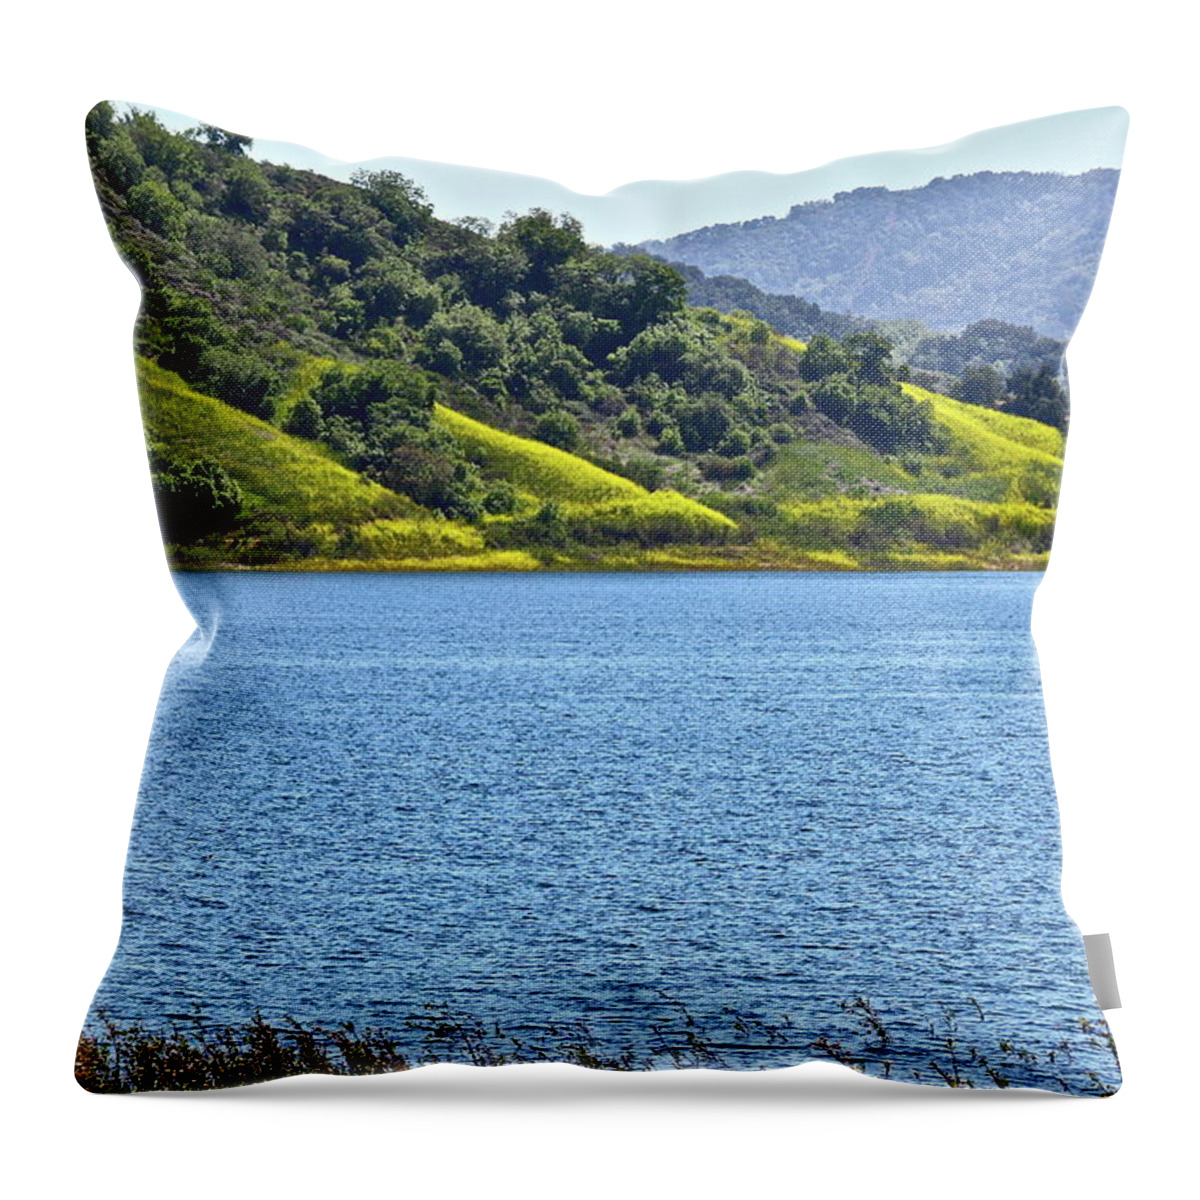 Landscape Throw Pillow featuring the photograph Mustard Patches by Diana Hatcher